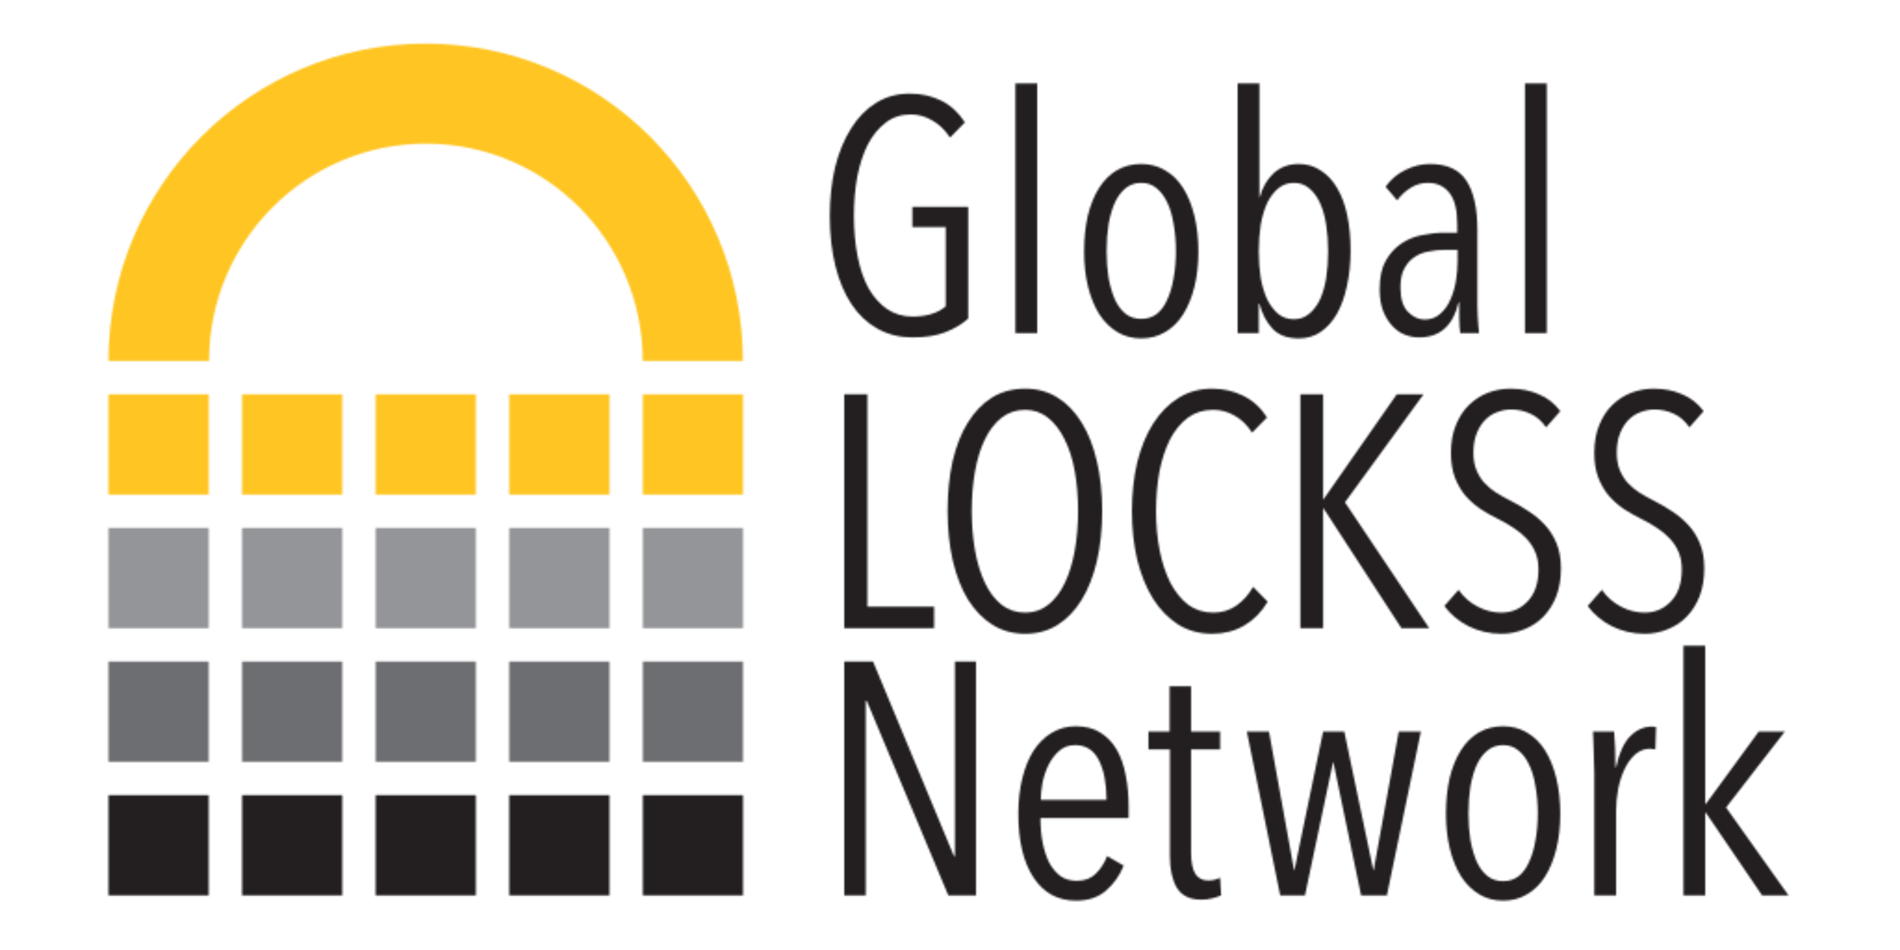 Logo of the Global LOCKSS Network, consisting of an abstract grid of black, gray, and yellow squares in the shape of a padlock and the words "Global LOCKSS Network" stacked vertically on the right side